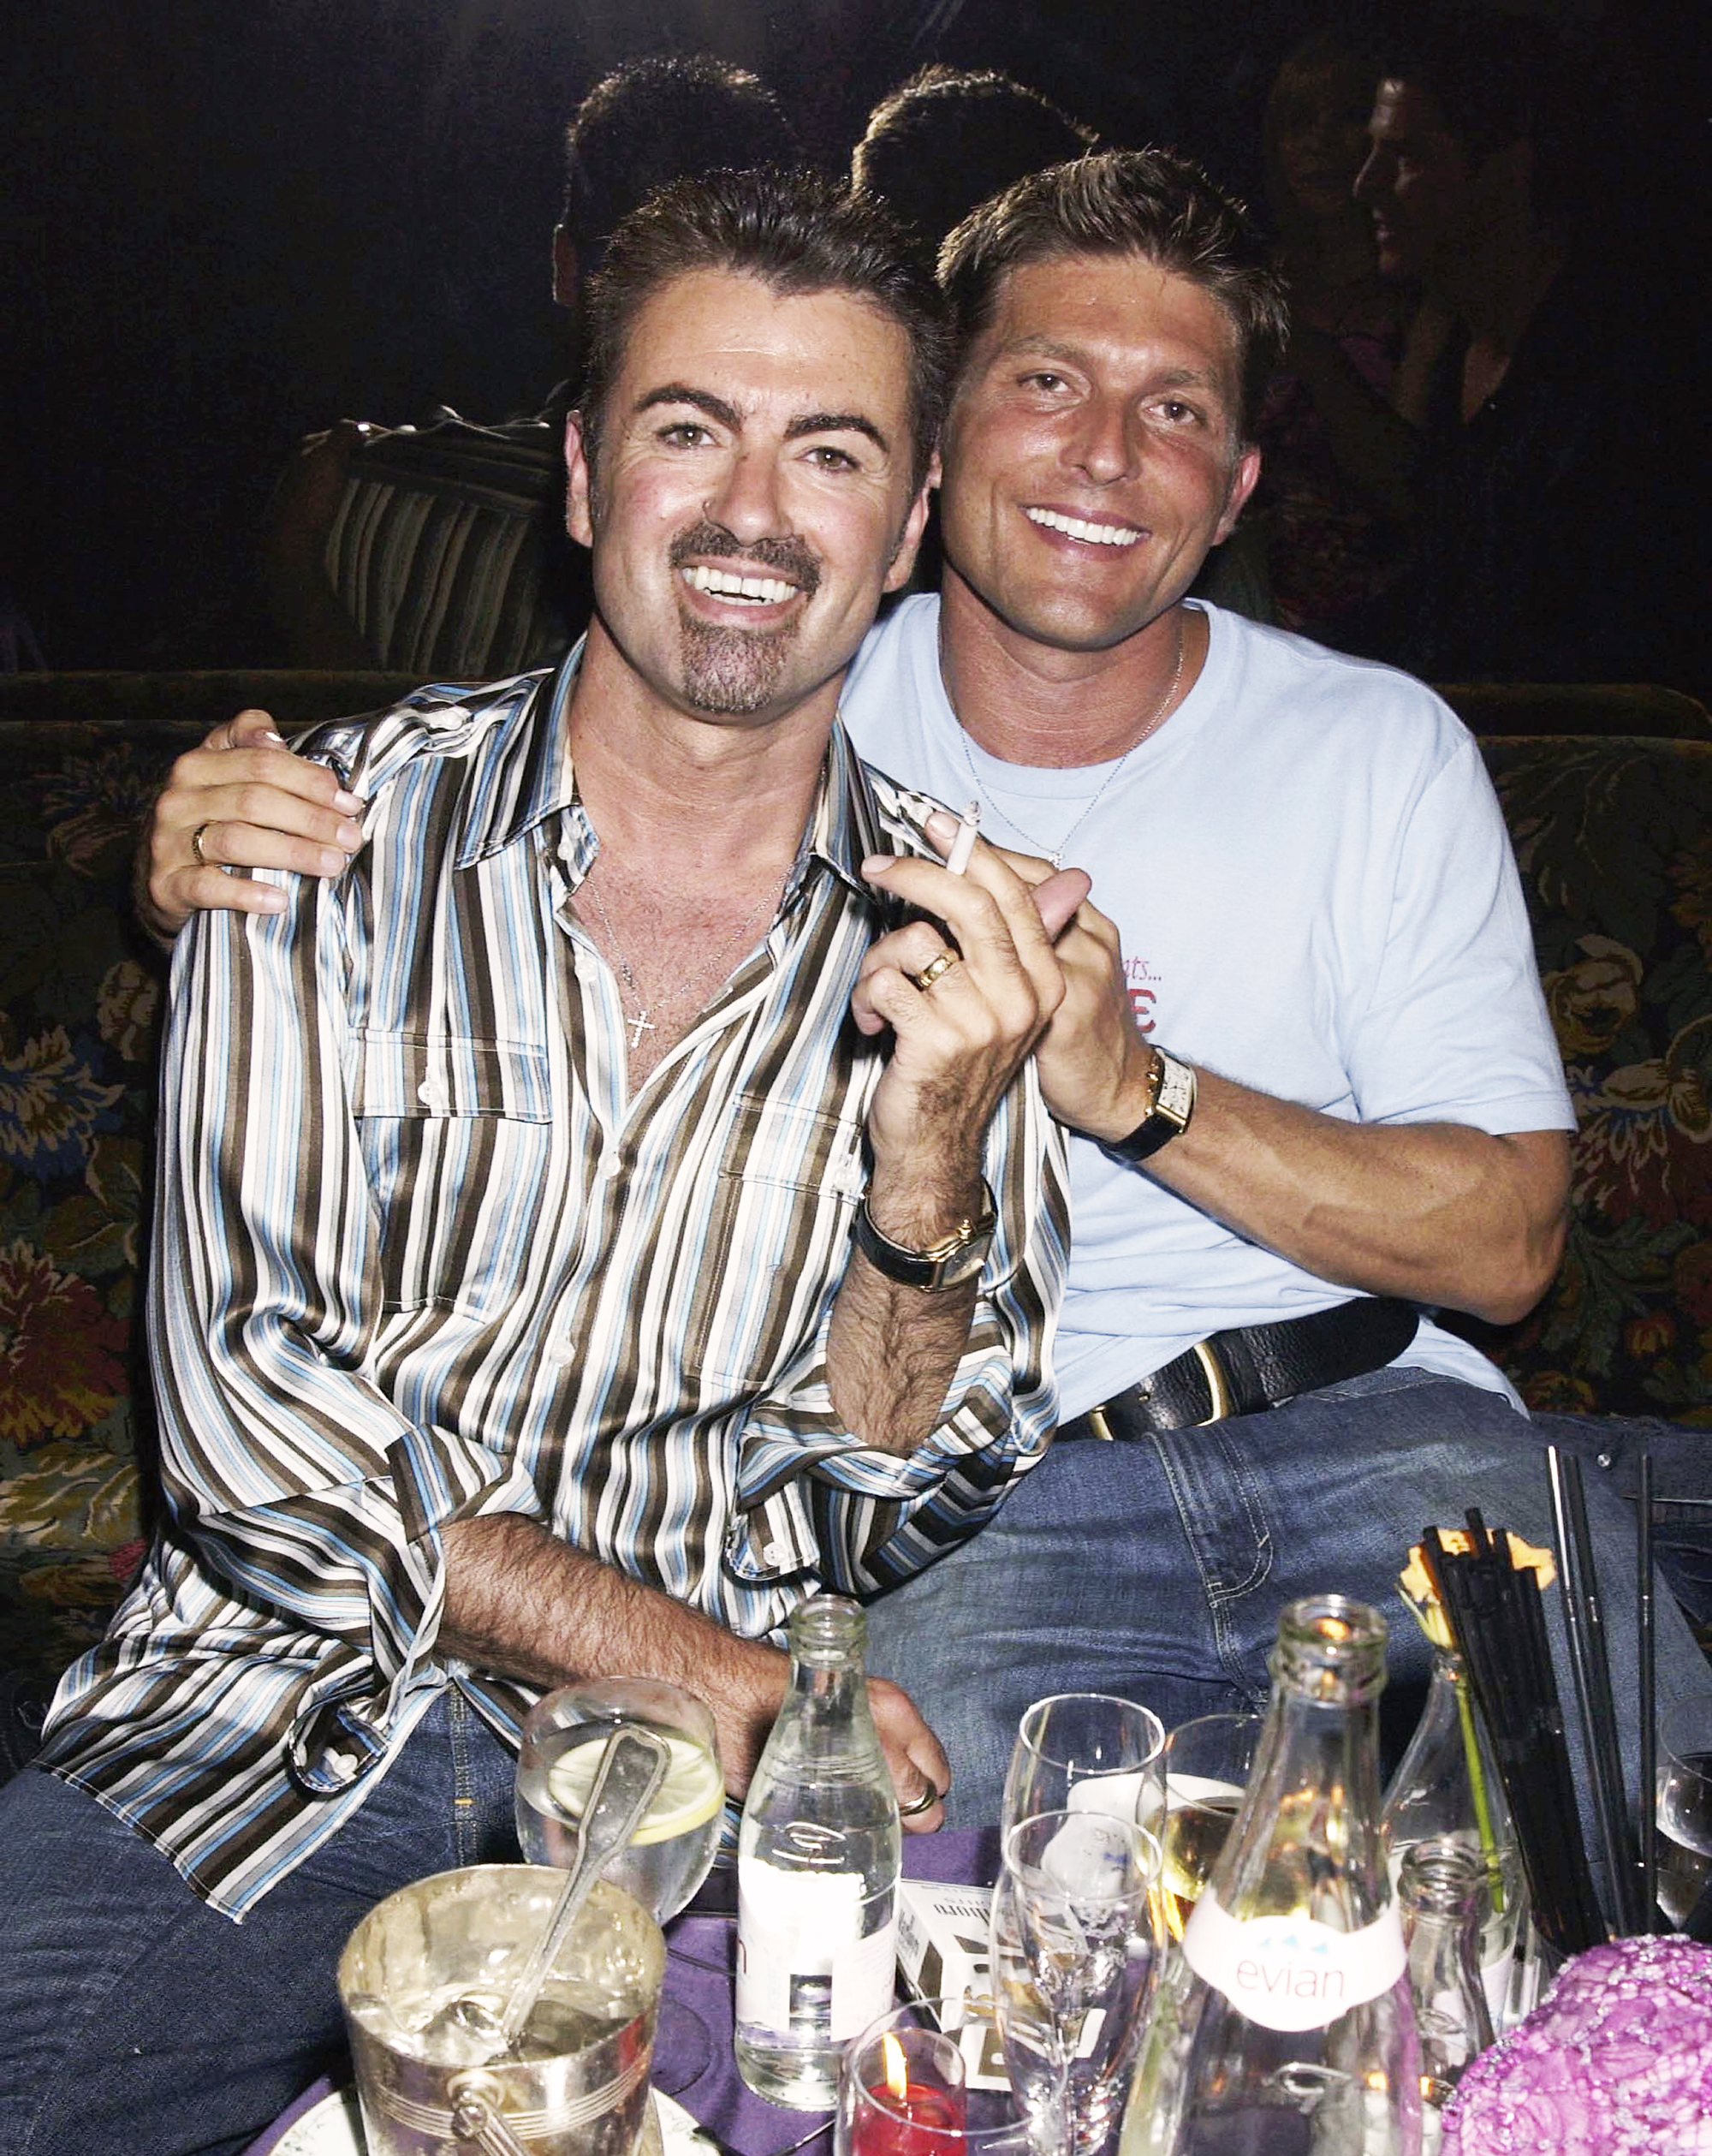 George Michael and partner Kenny Goss at the Versace Couture launch party in Paris, on July 9, 2002.